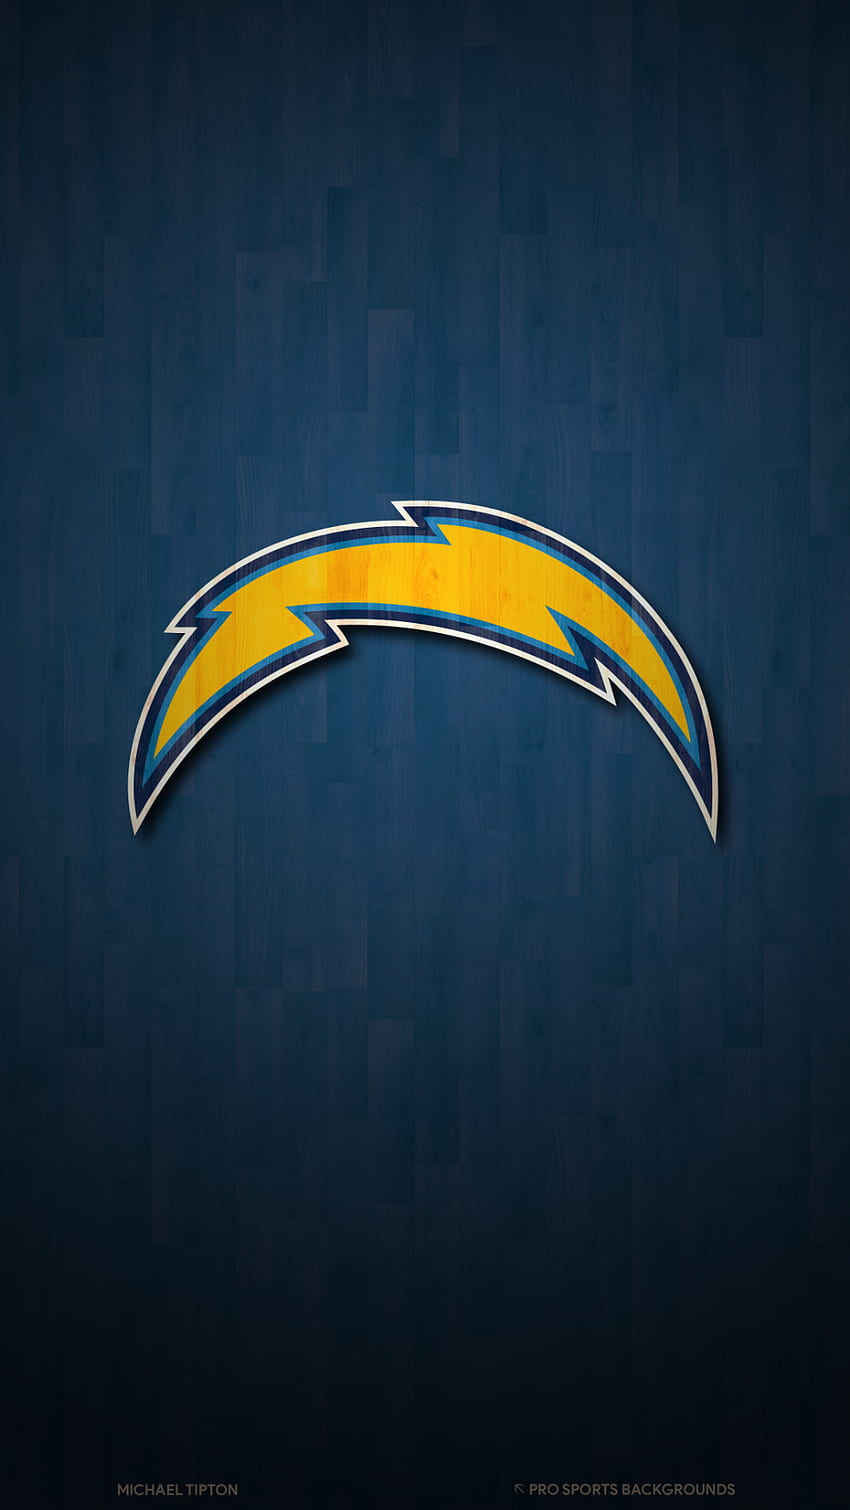 Los Angeles Chargers . Pro Sports Background. Los angeles chargers, Los angeles chargers logo, San diego chargers HD phone wallpaper